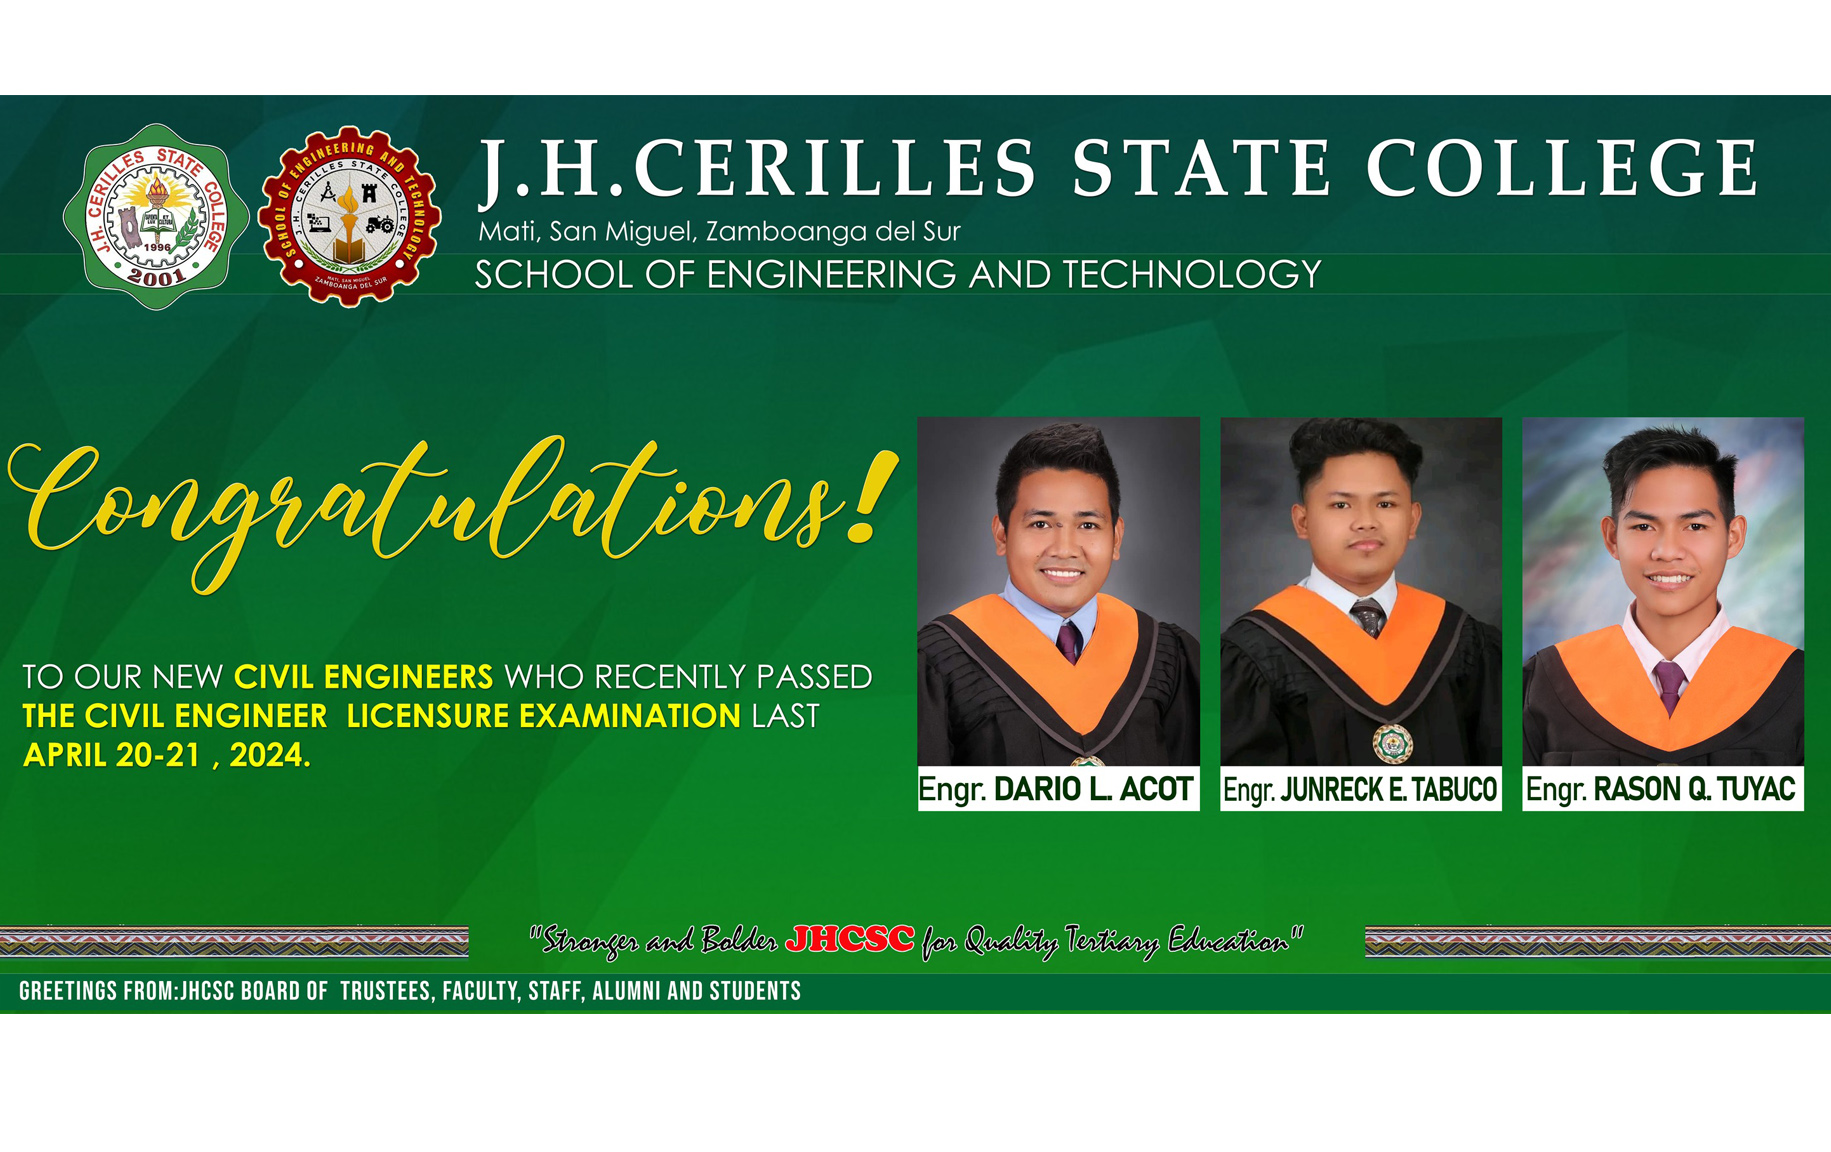 Congratulations to our NEW CIVIL ENGINEERS who passed the CIVIL ENGINEERING EXAMINATIONS held last April 20-21, 2024